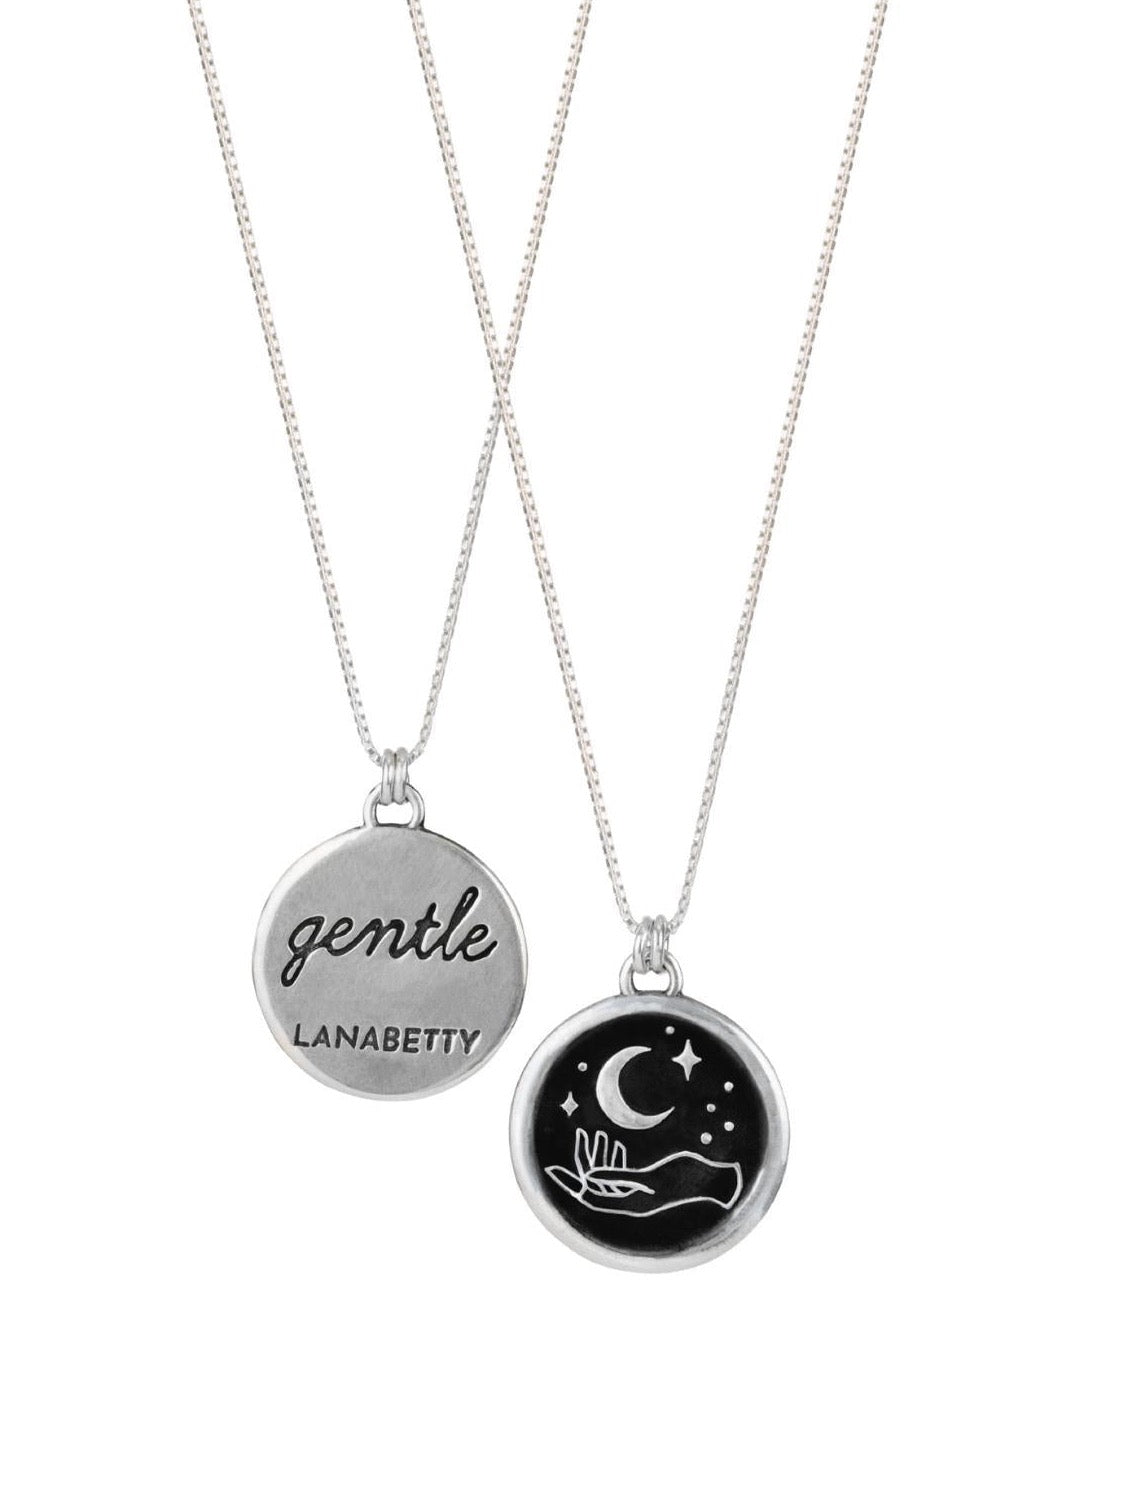 Gentle Sterling Silver Mantra Necklace with 18" chain by Lanabetty